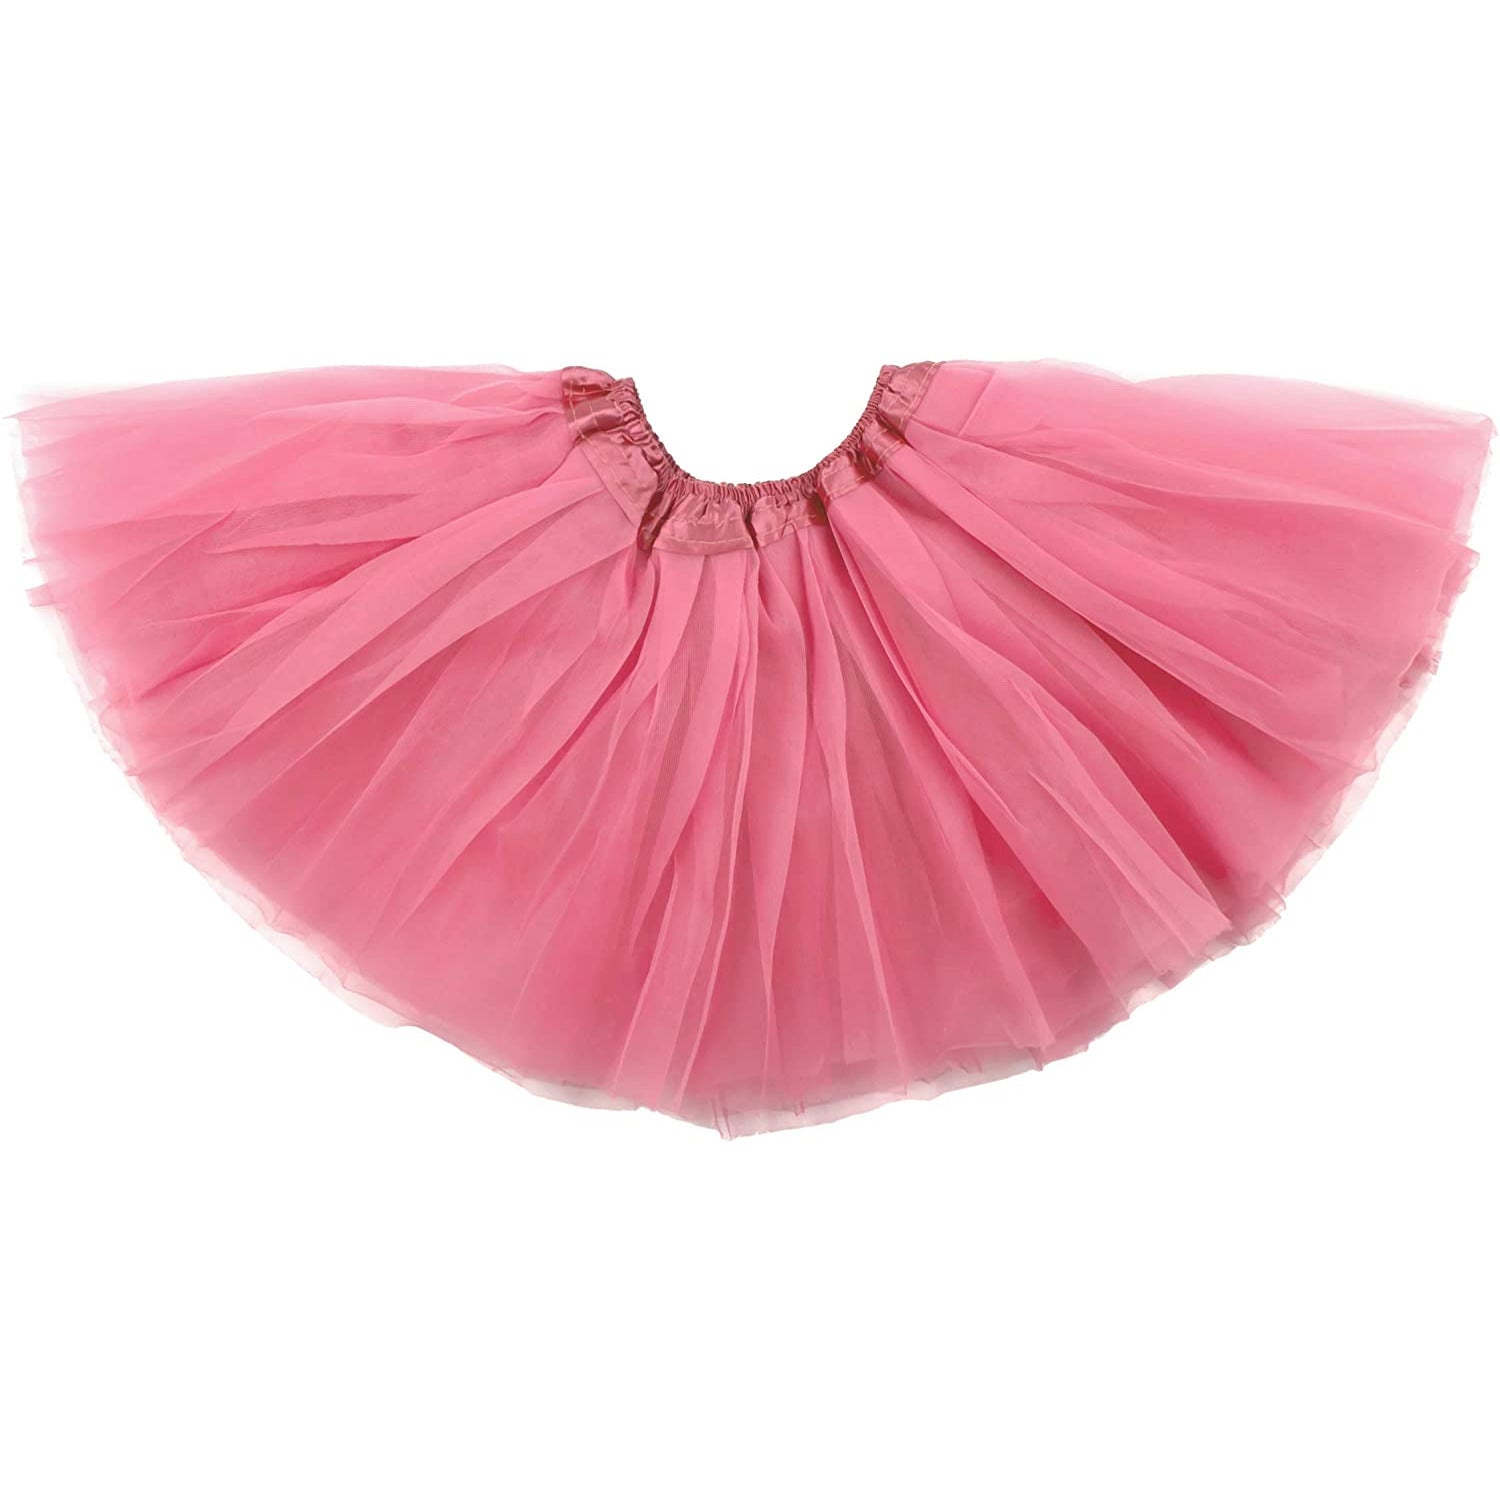 Dancina Tulle Skirt for Girls 2-12 years in Blush Pink